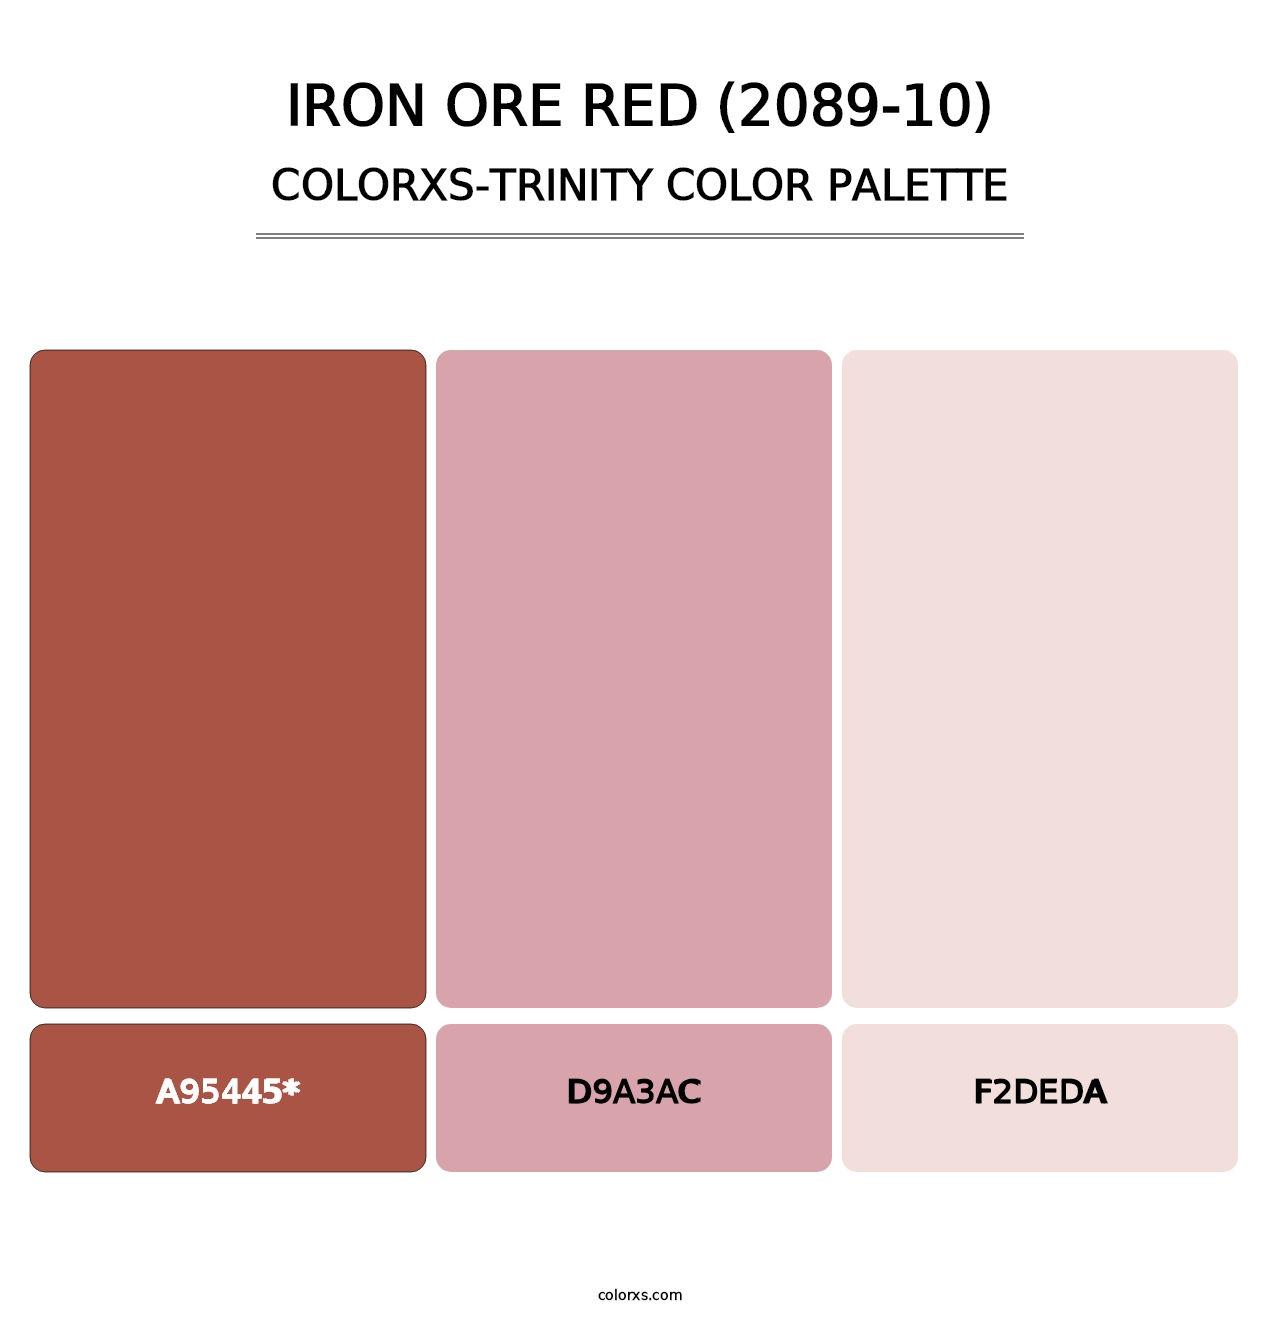 Iron Ore Red (2089-10) - Colorxs Trinity Palette